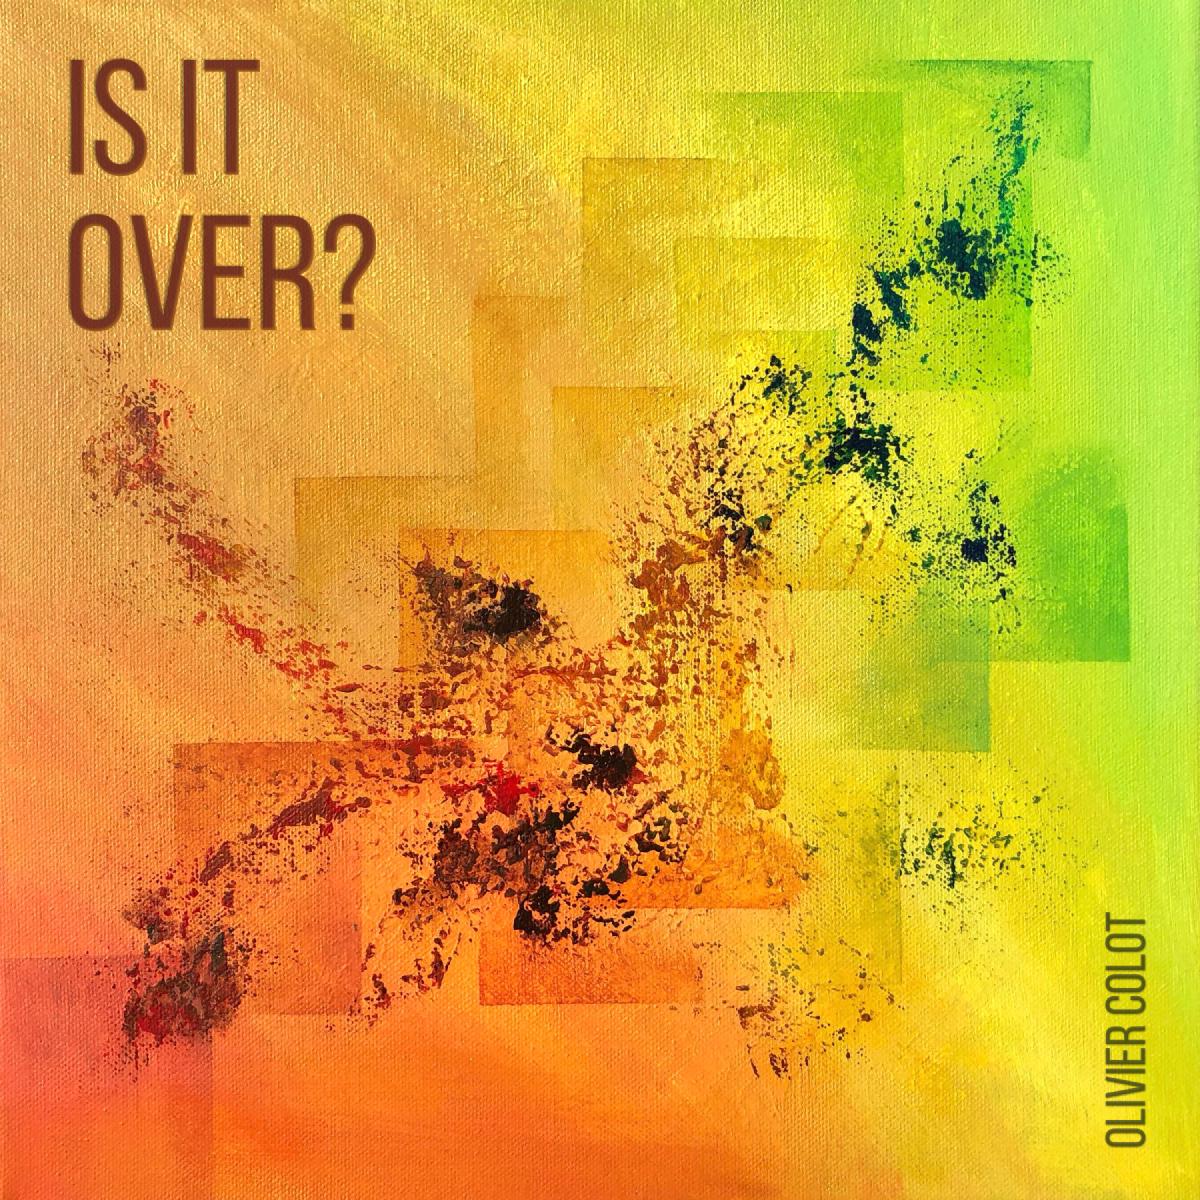 Is it over?